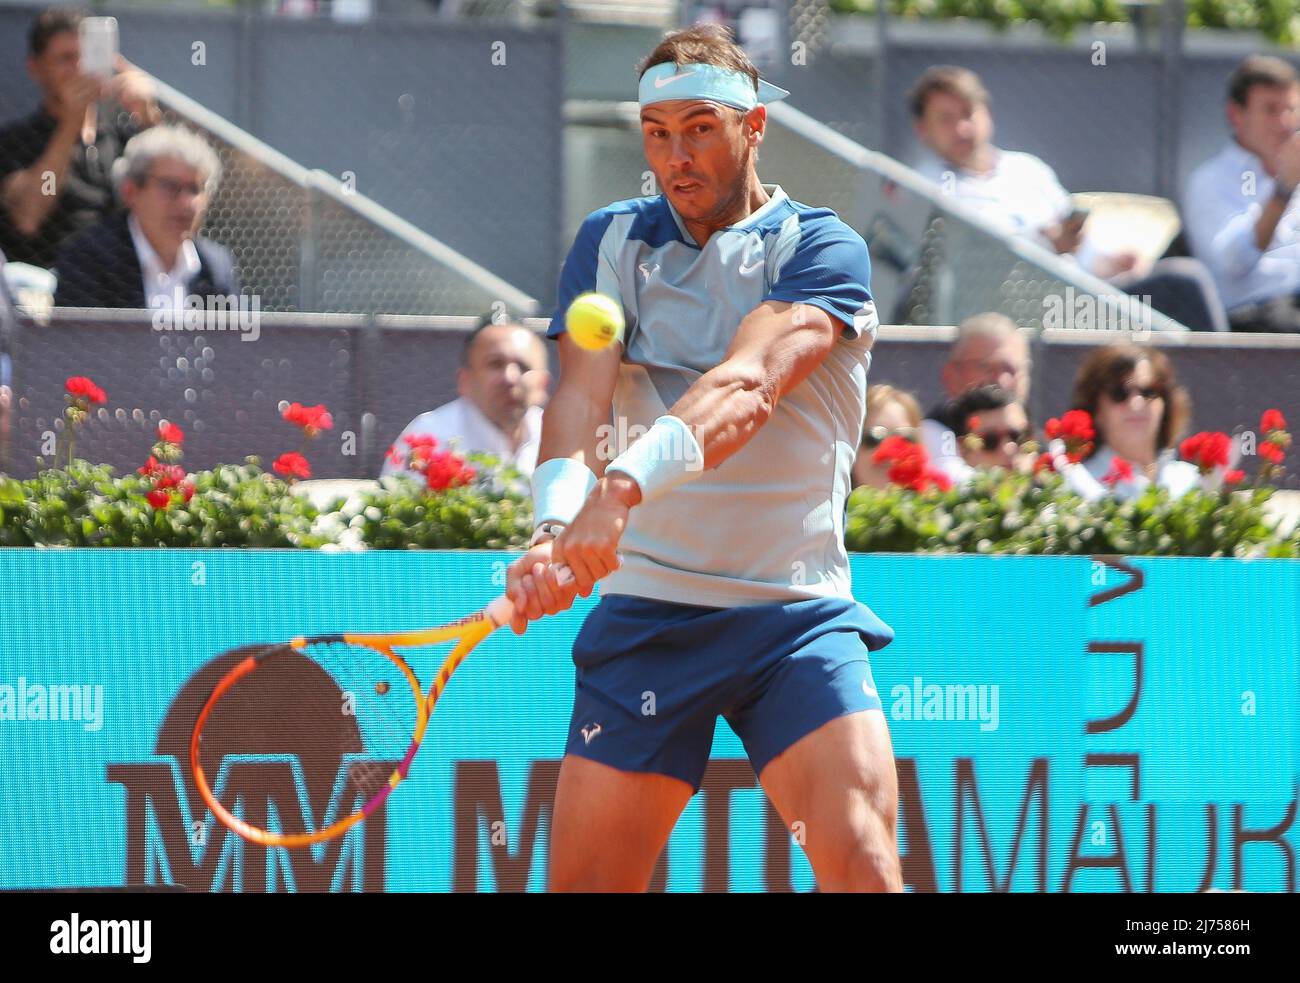 Rafael Nadal of Spain in action against David Goffin of Belgium during the  Mutua Madrid Open